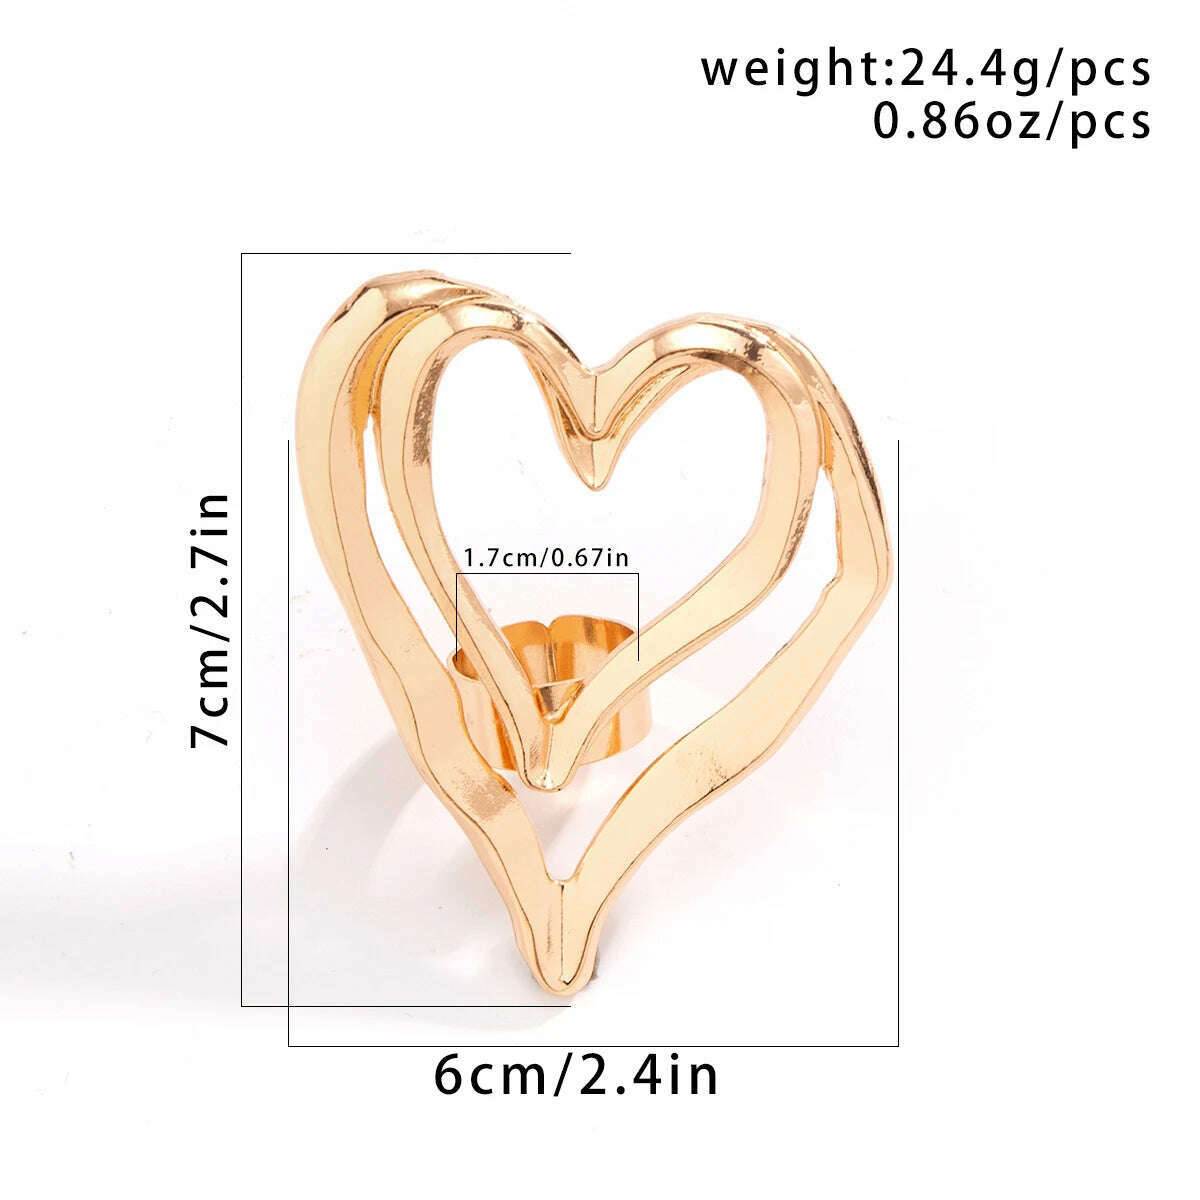 KIMLUD, Unique Exaggerated Big Hollow Out Love Heart Rings for Women Trendy Creative Adjustable Open Rings Couple Y2K Jewelry Steampunk, KIMLUD Womens Clothes